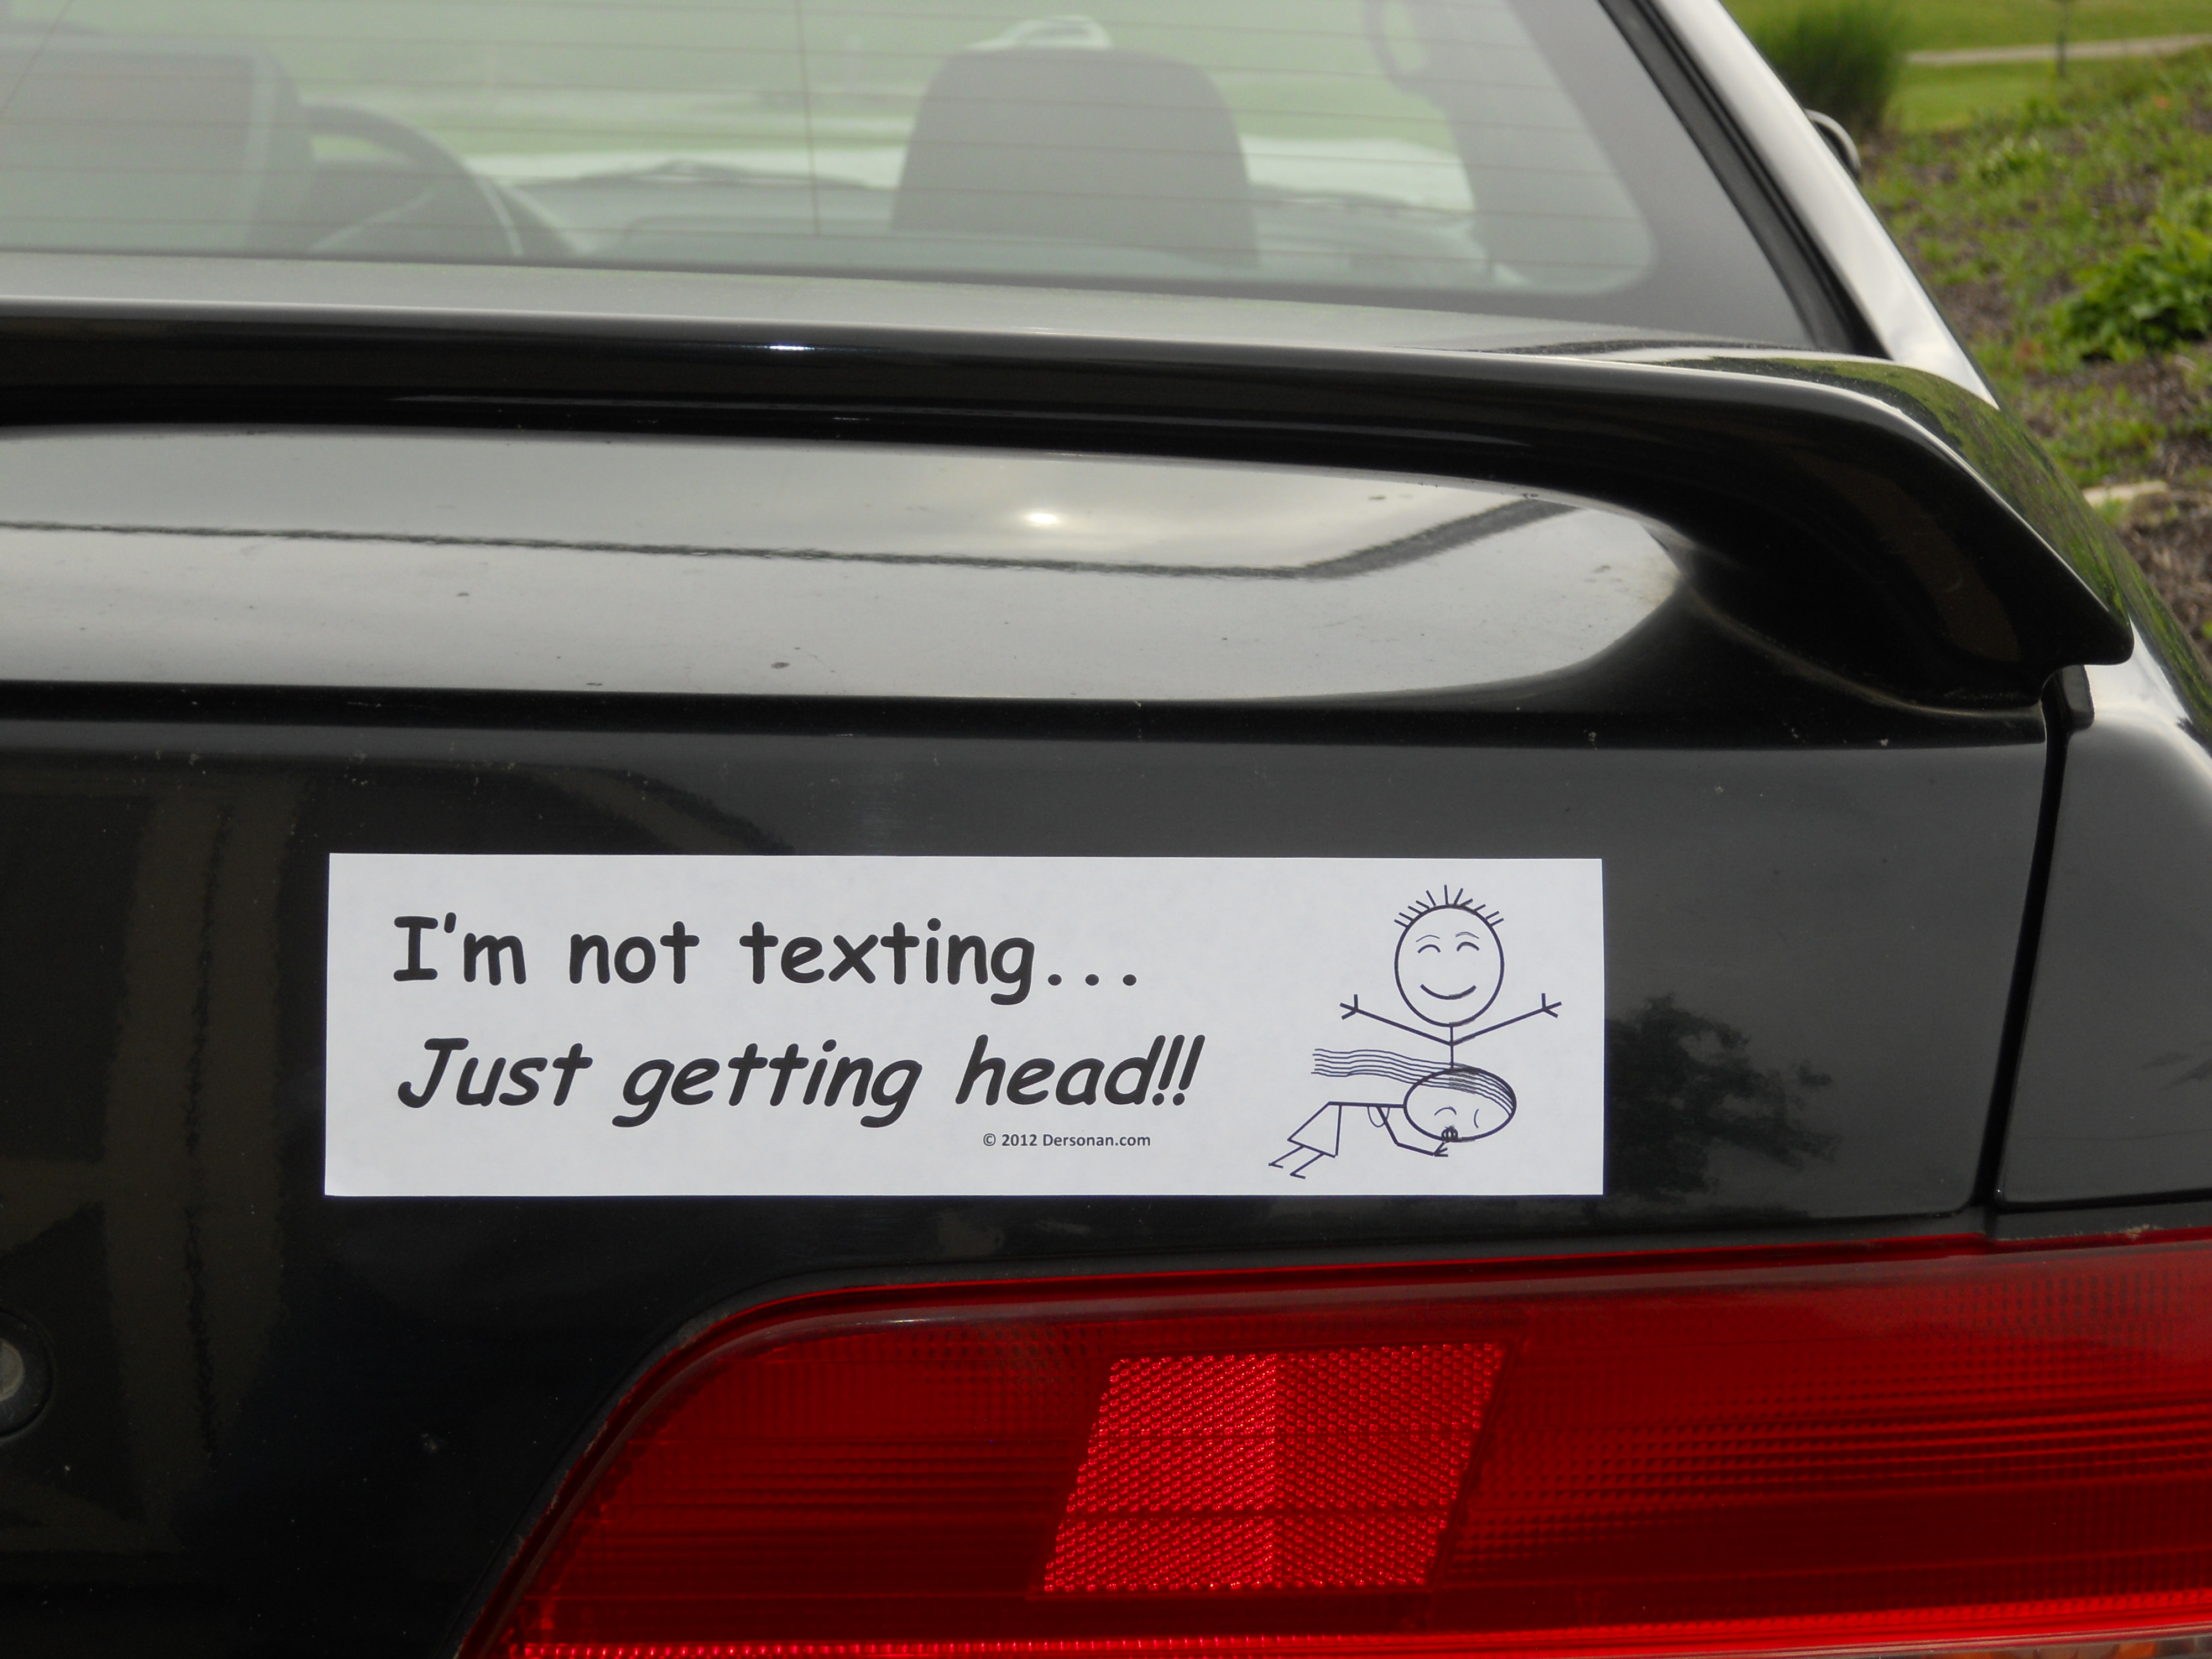 Not every swerving car on the road is texting. I got to get one.